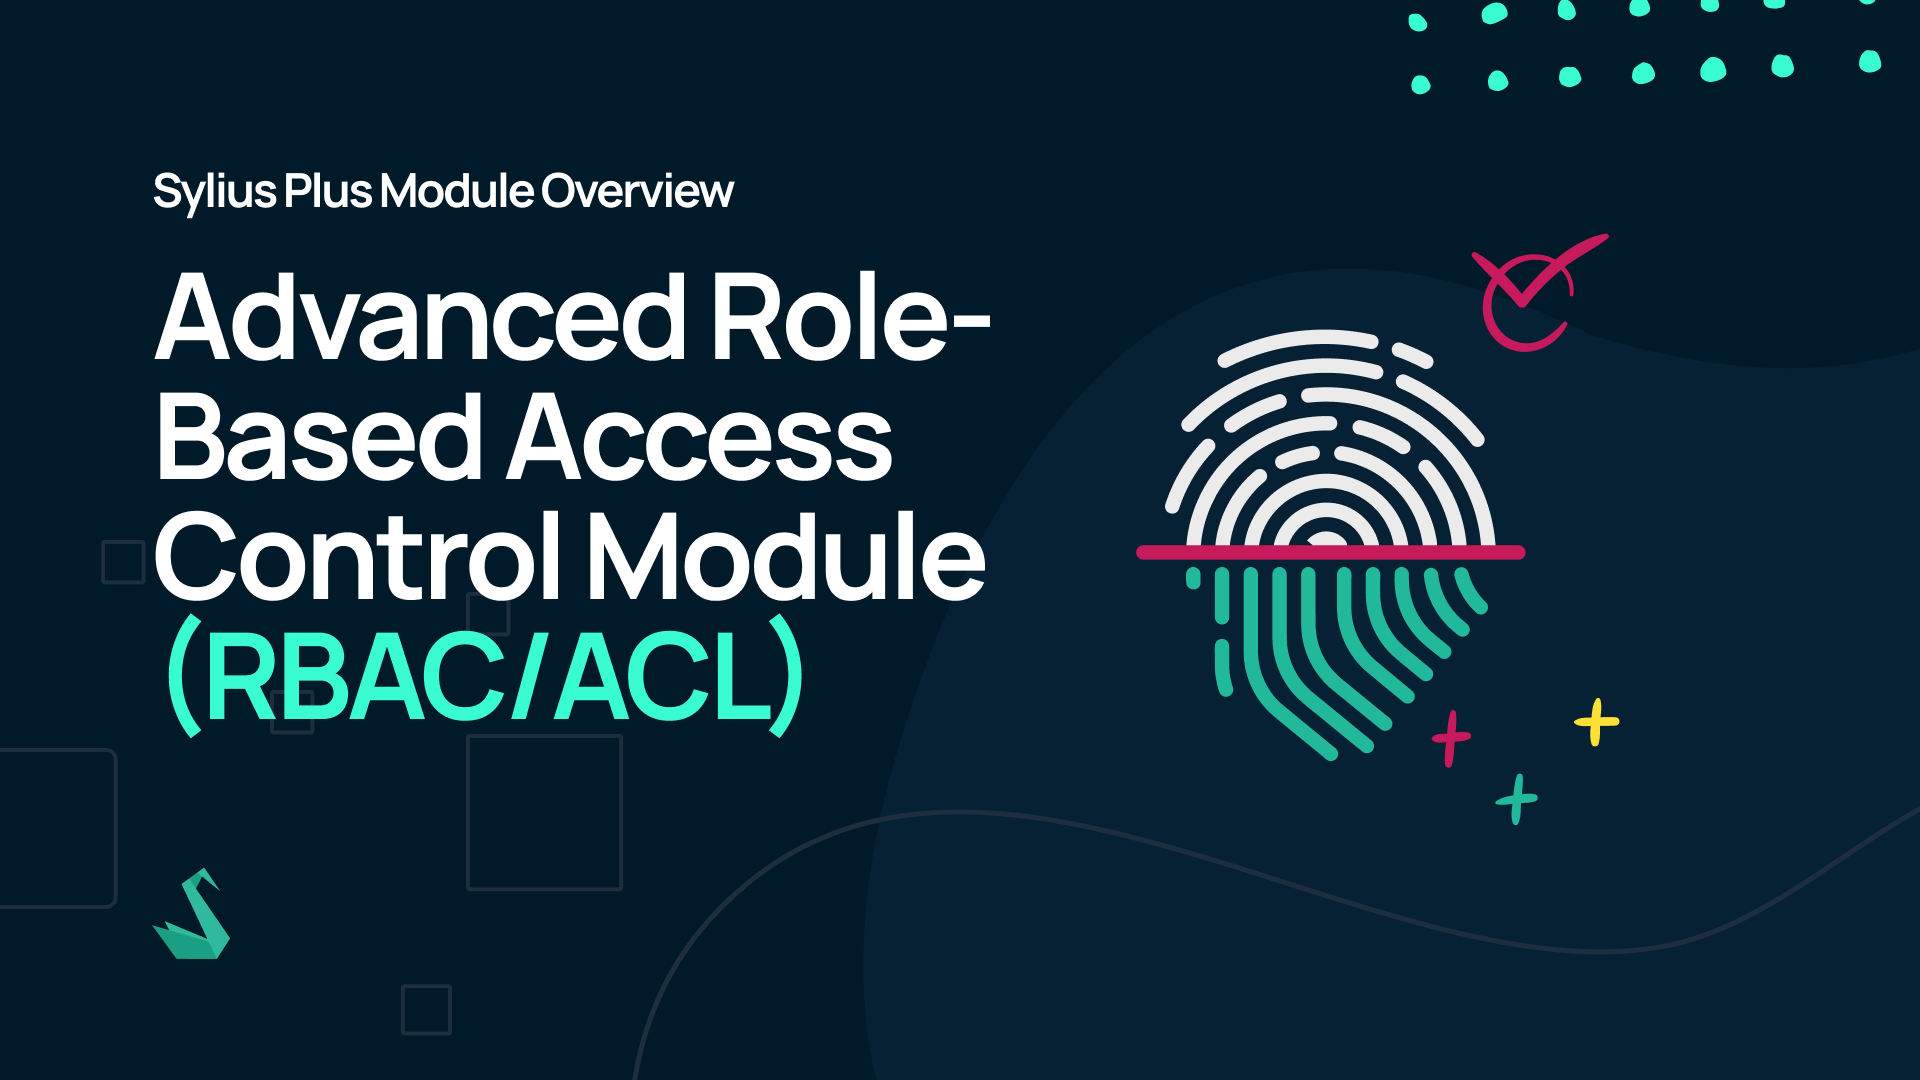 Sylius Plus Module Overview: Advanced Role-Based Access Control Module (RBAC/ACL)